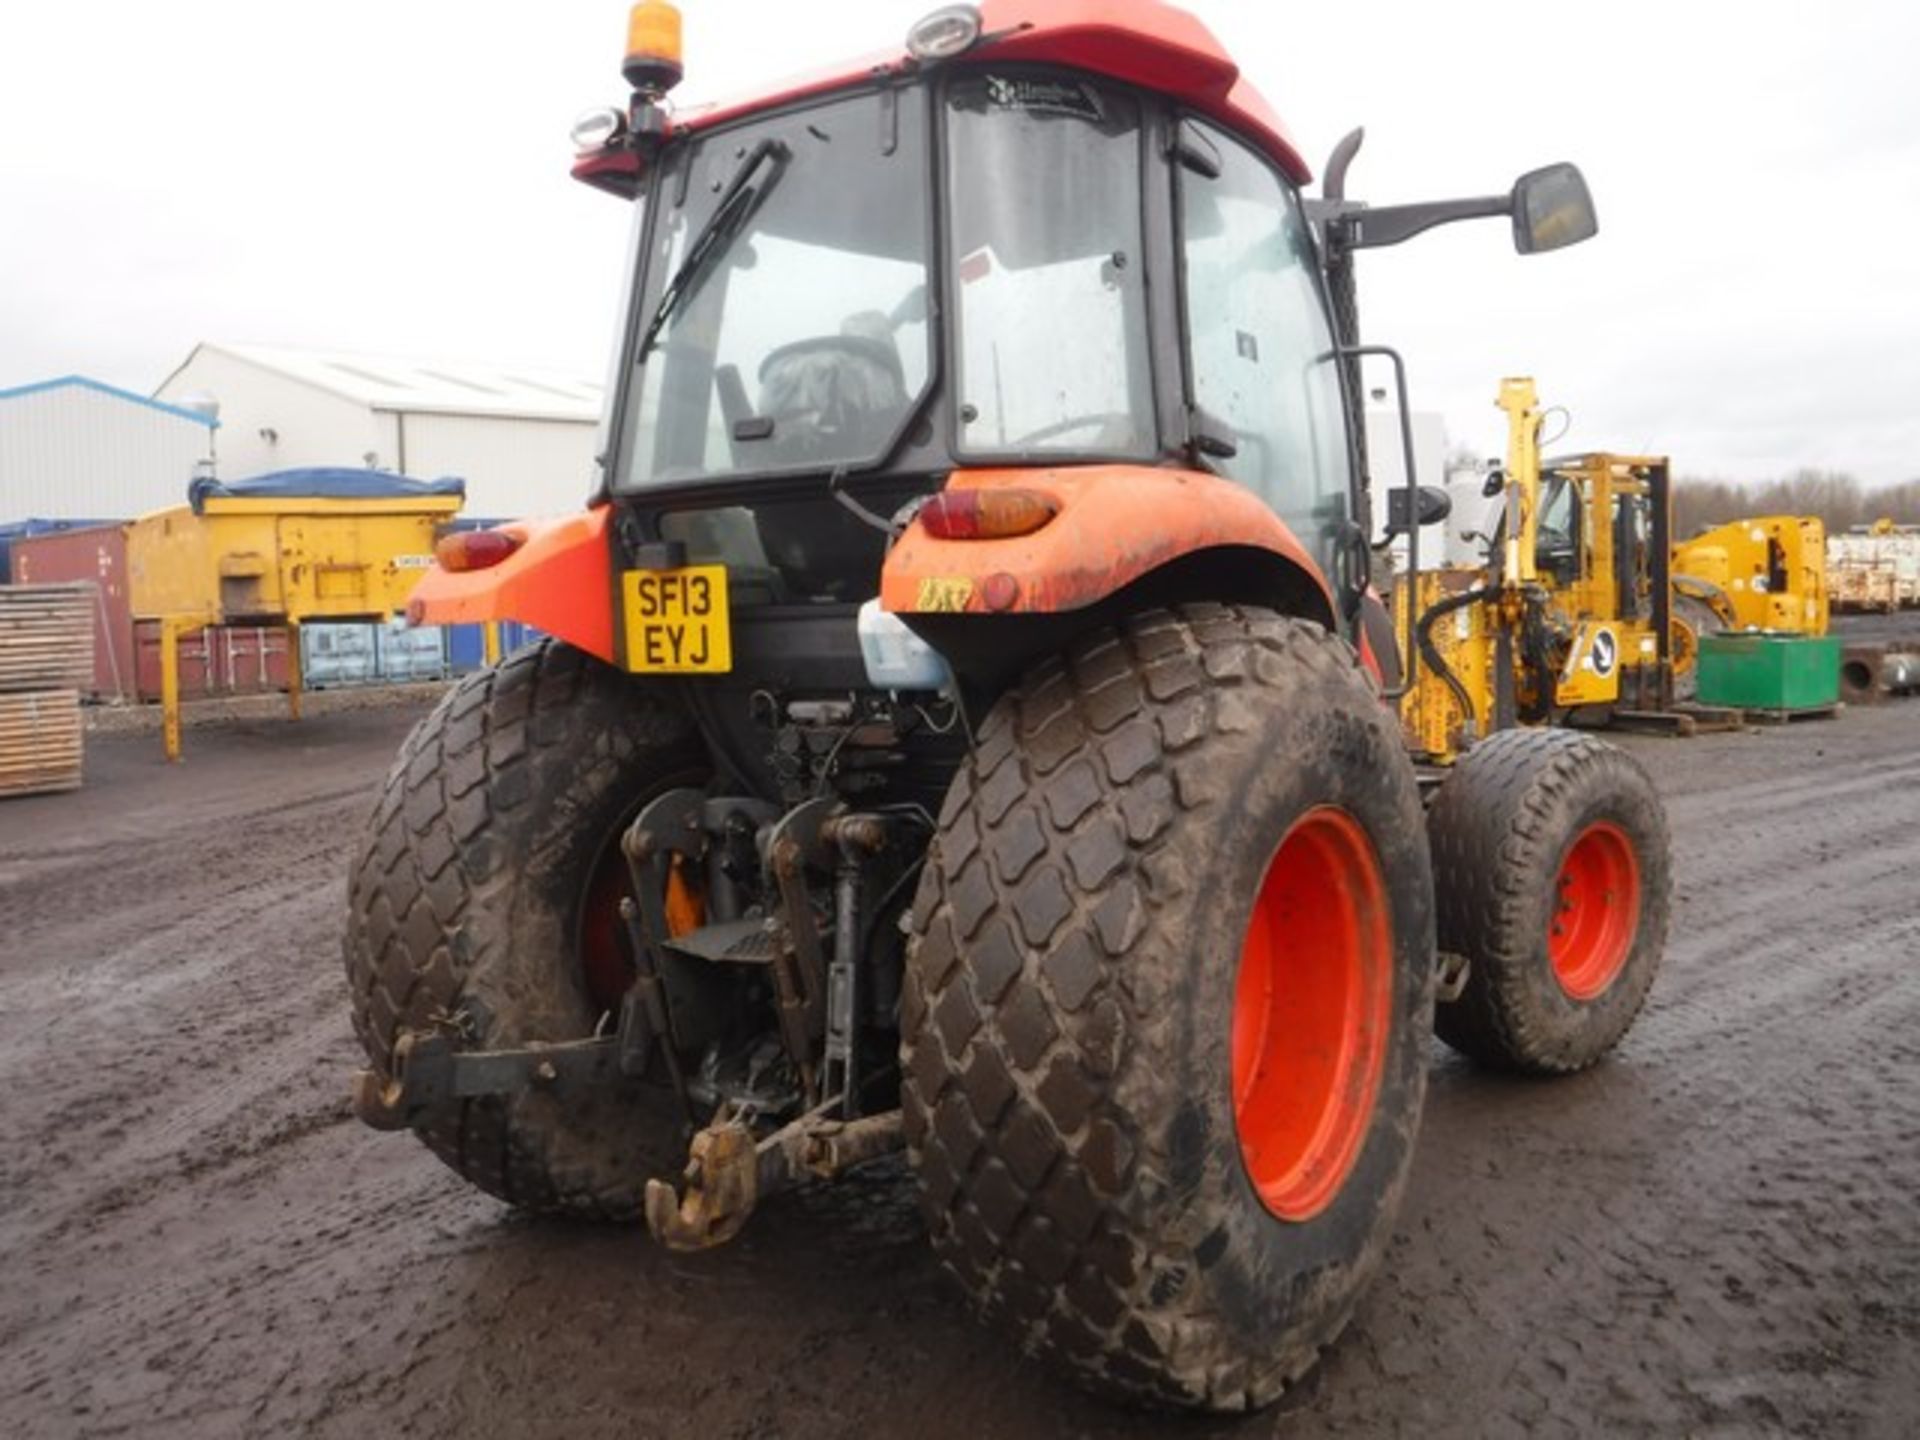 2013 KUBOTA M6040H-C AAGRIC TRACTOR REG - SF13EYJ - 6828HRS - Image 7 of 10